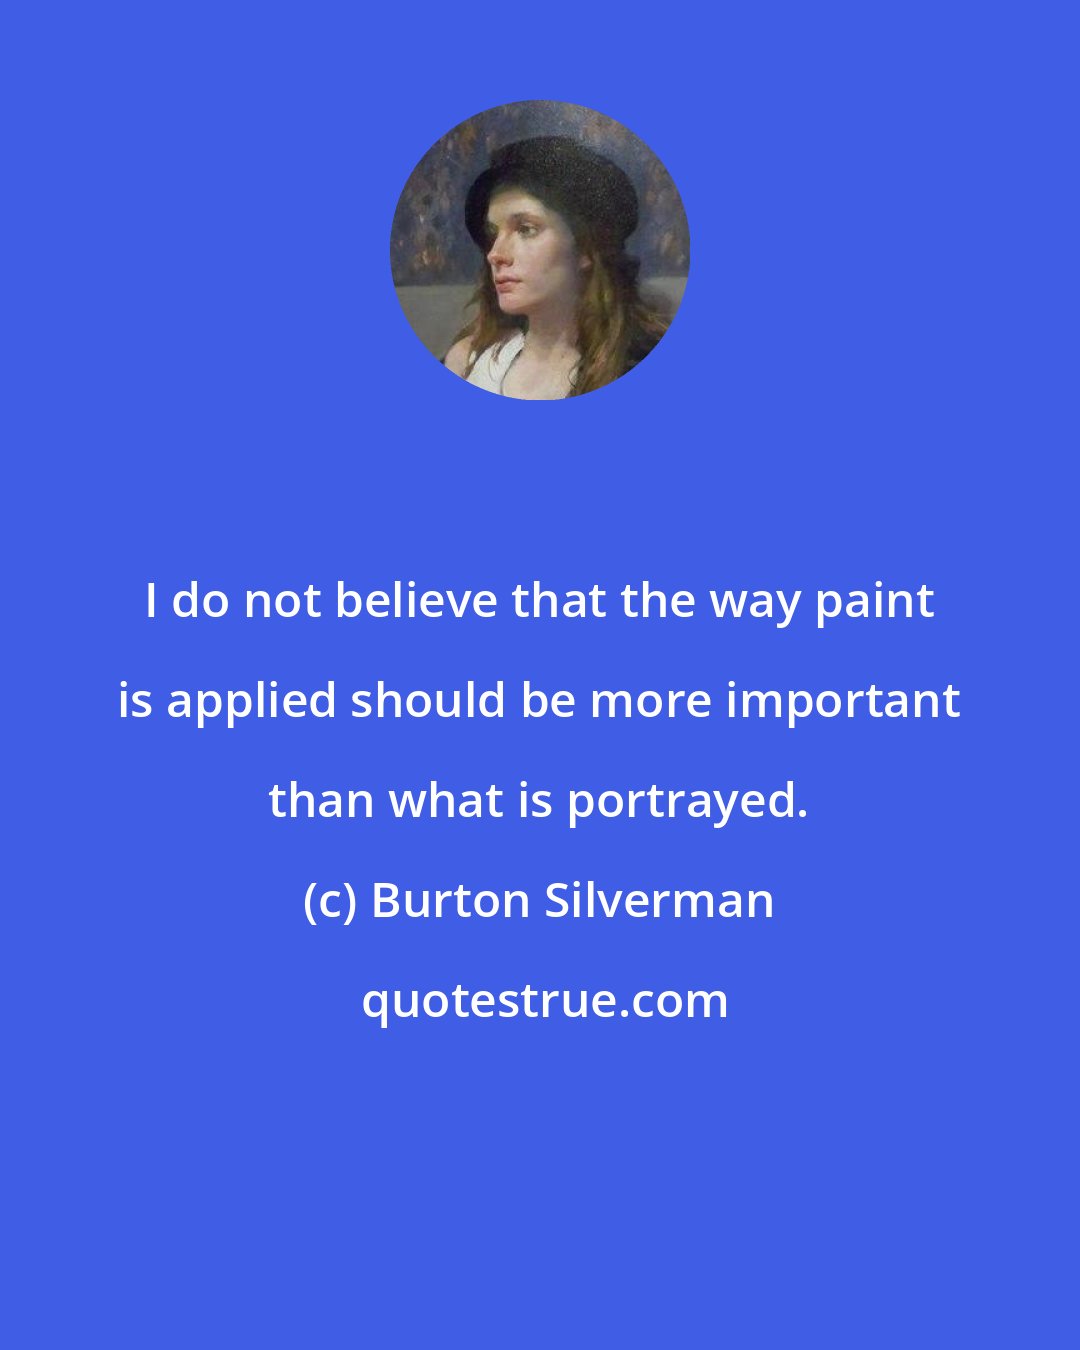 Burton Silverman: I do not believe that the way paint is applied should be more important than what is portrayed.